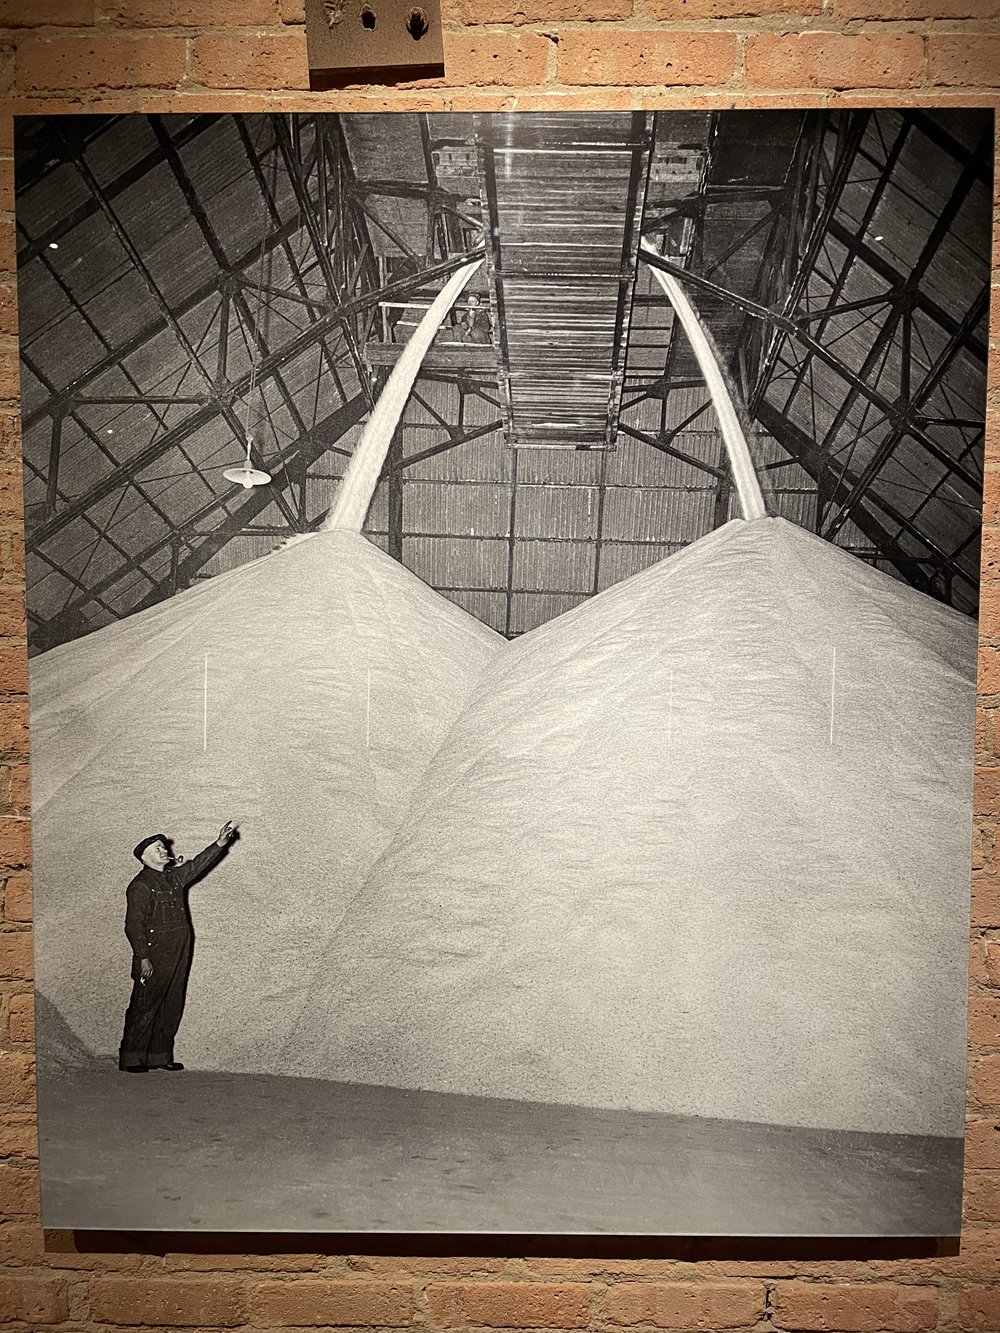 &lt;em&gt;Archival images on display at the Shed: Salt diverted off the conveyer belt in the roof monitor, poured into piles on the floor of the shed, August 1946&lt;/em&gt;